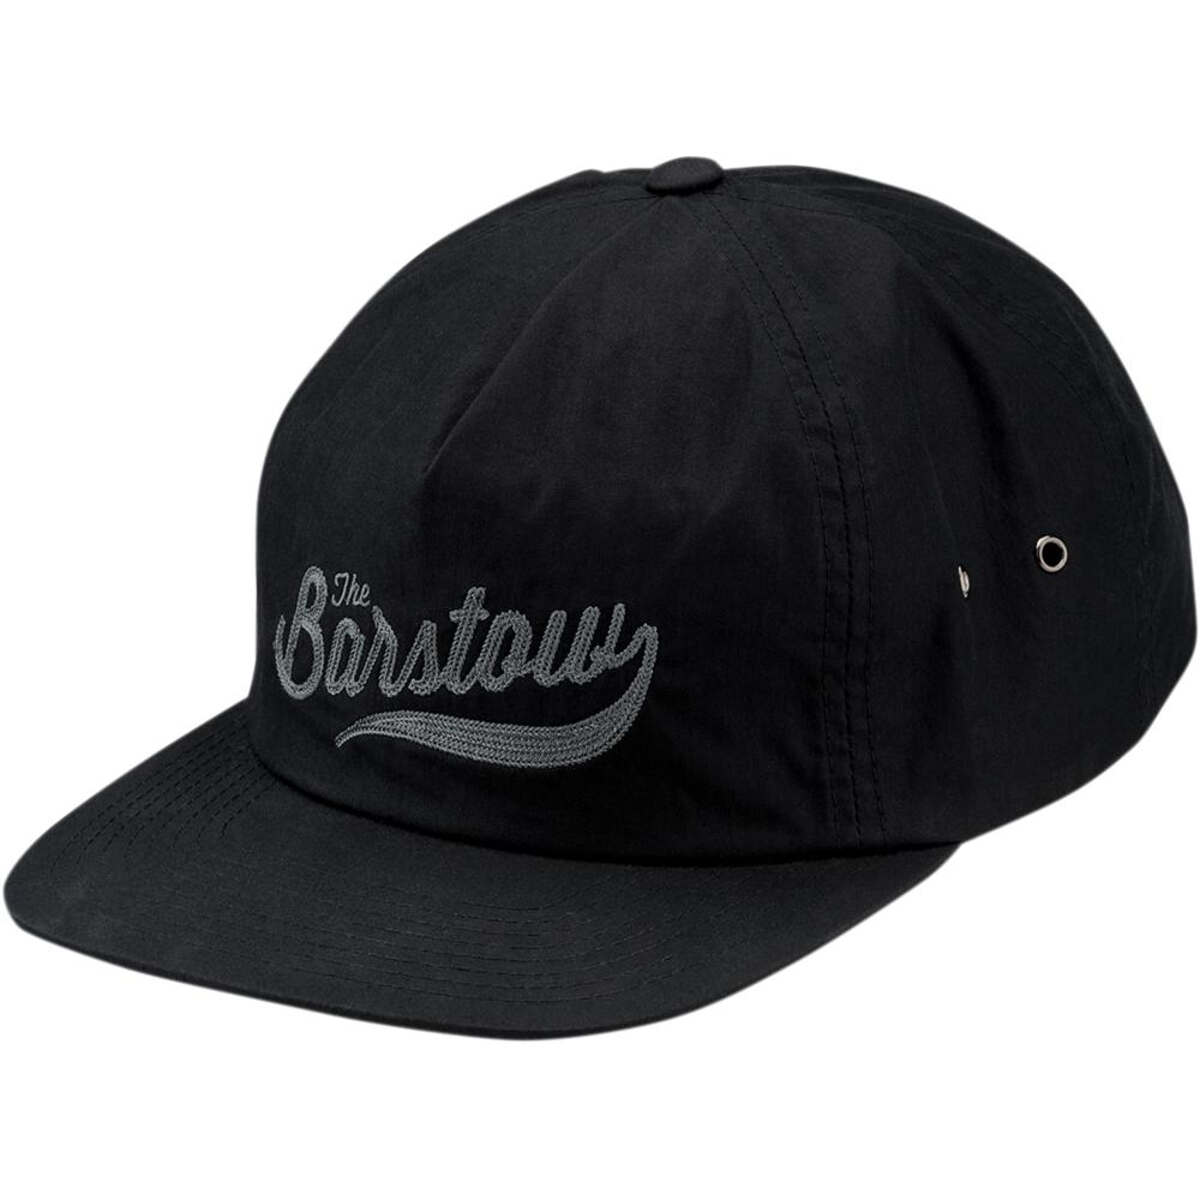 100% Casquette Snap Back The Barstow Black